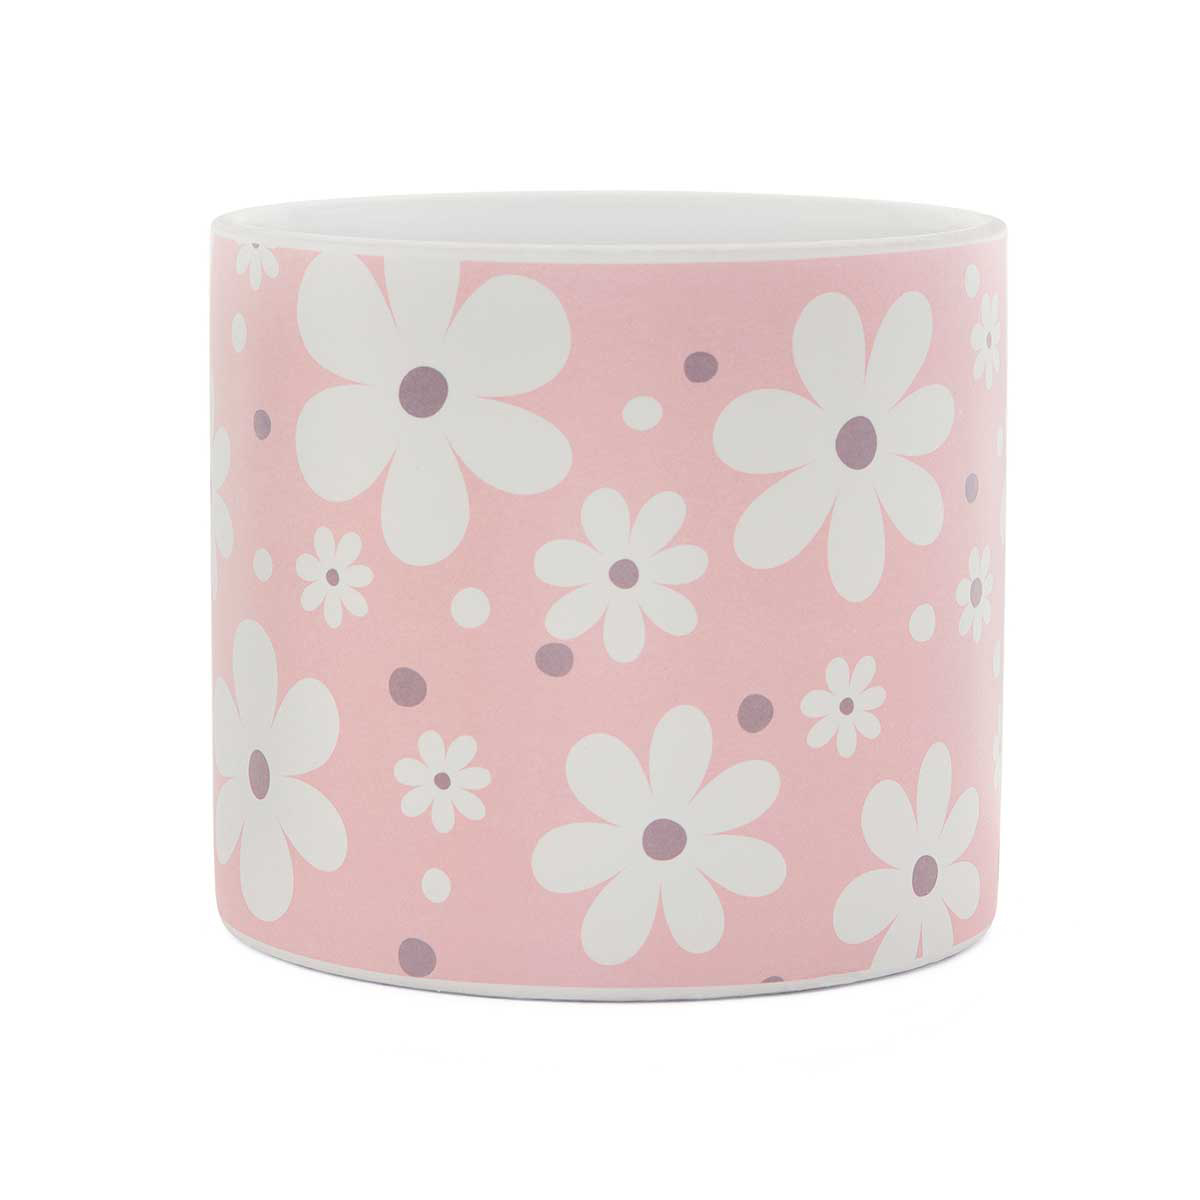 WHOOPSIE DAISY CERAMIC POT PINK/WHITE LARGE 5.25"X4.75"